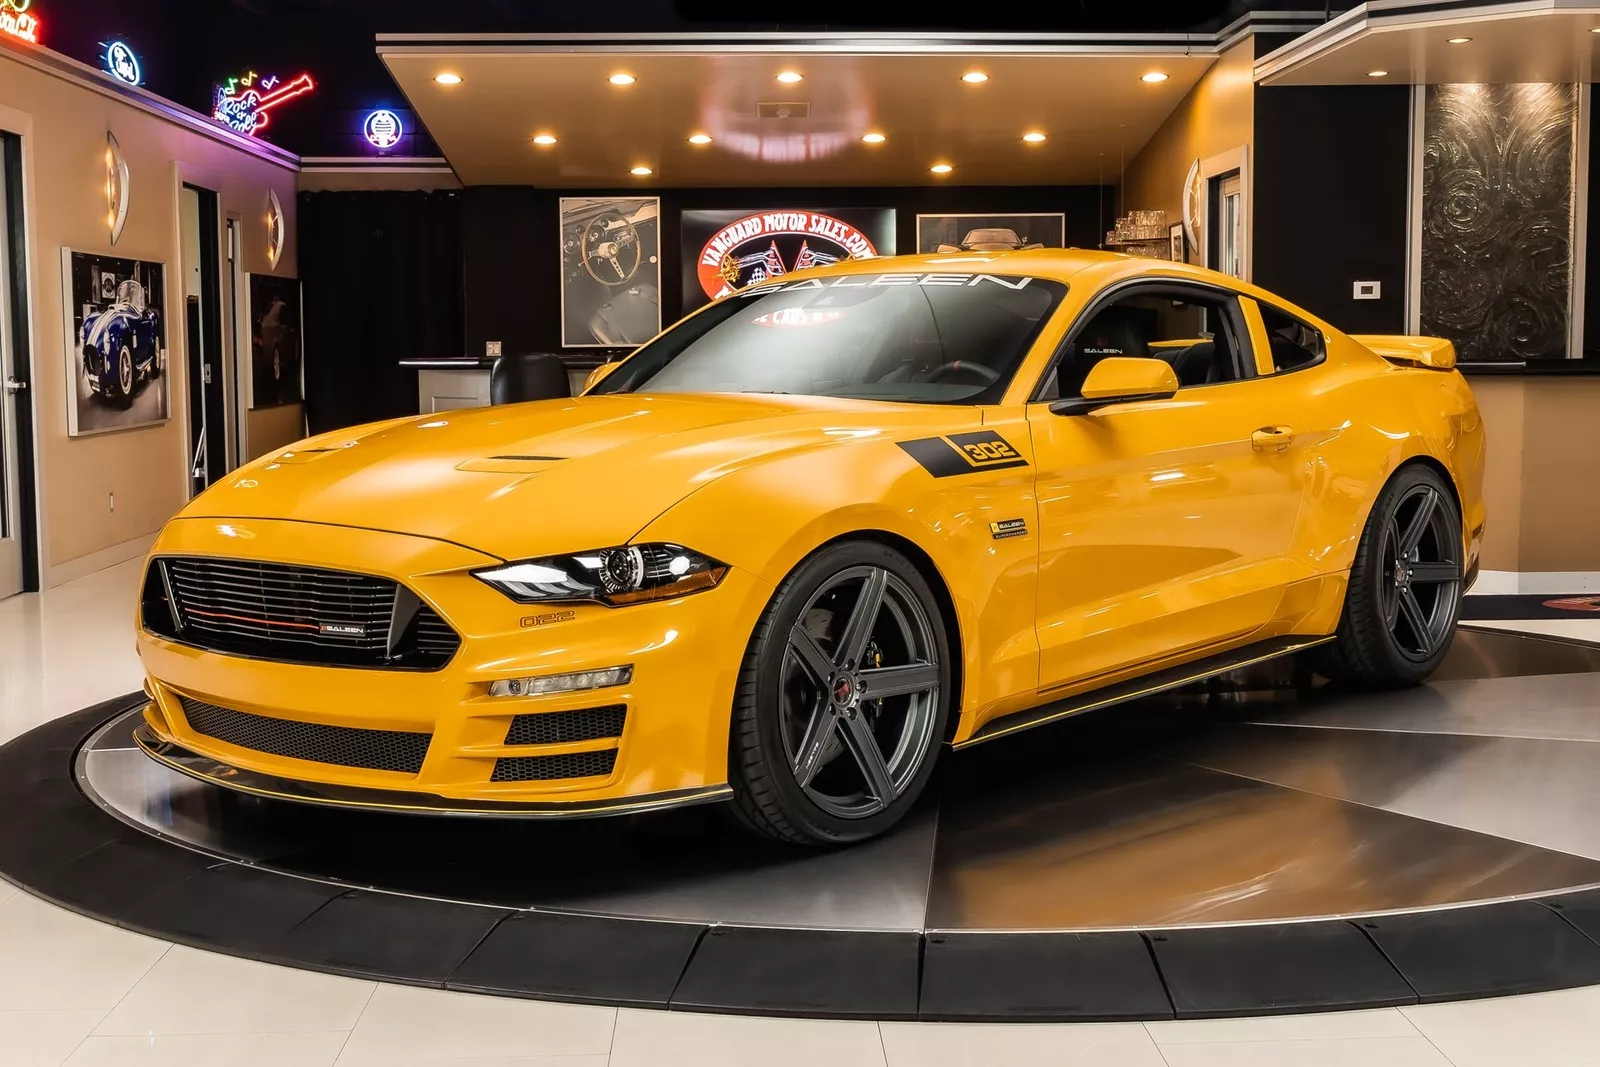 2022 Ford Mustang for sale